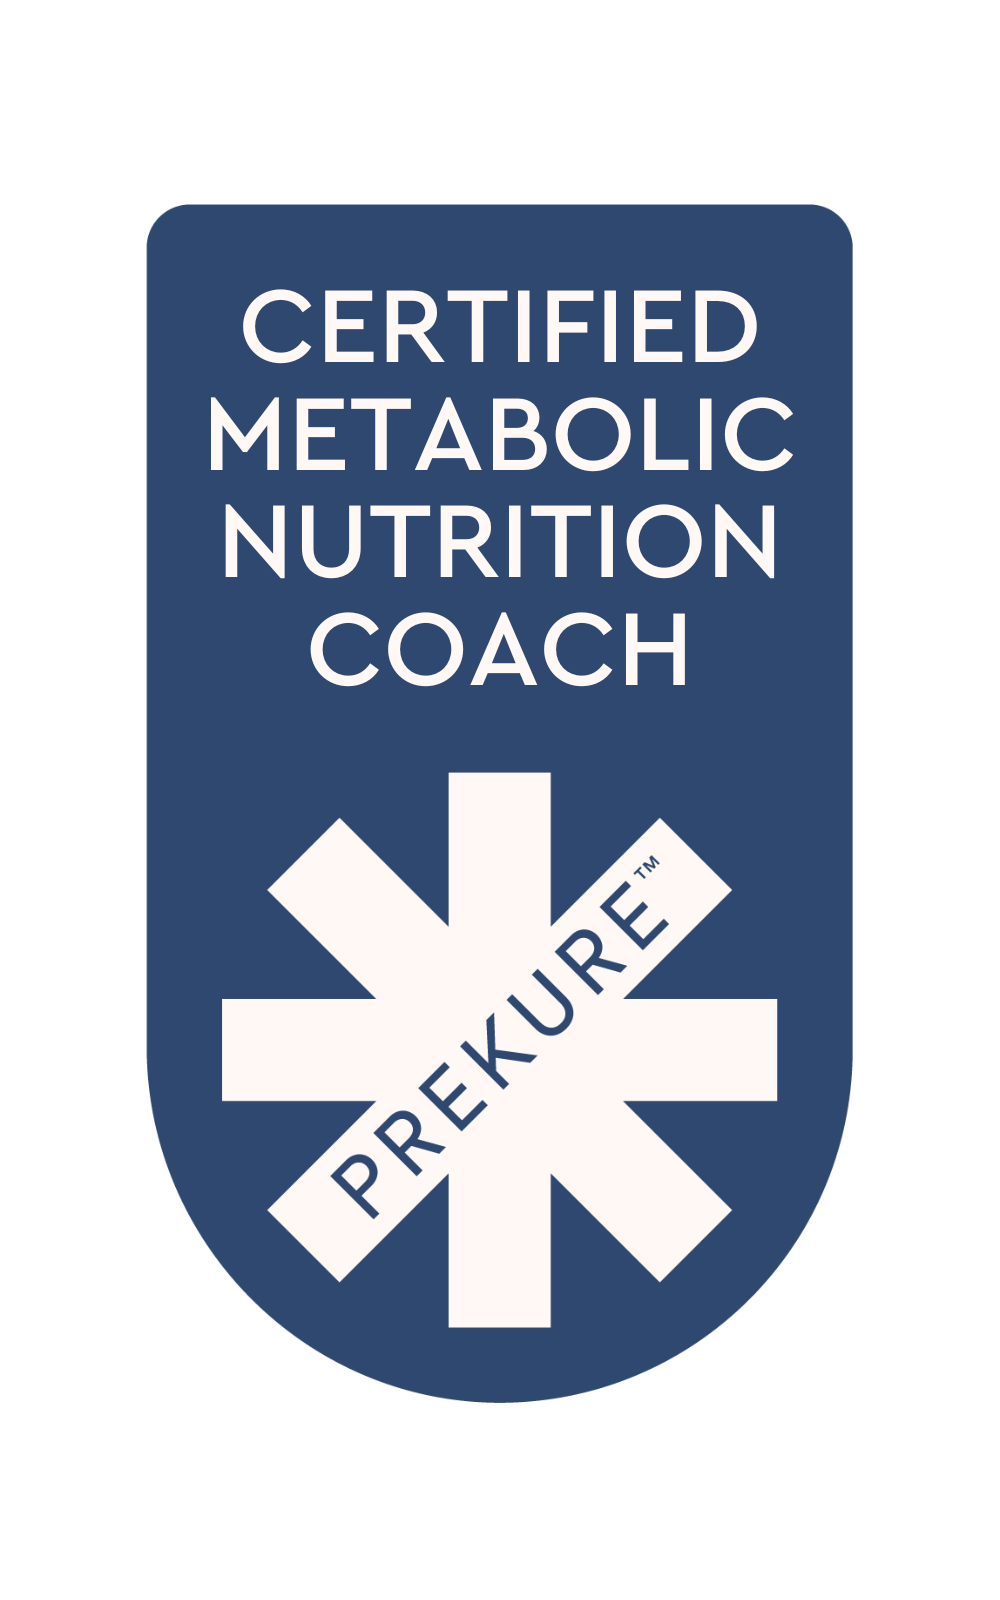 Certified Metabolic Nutrition Coach